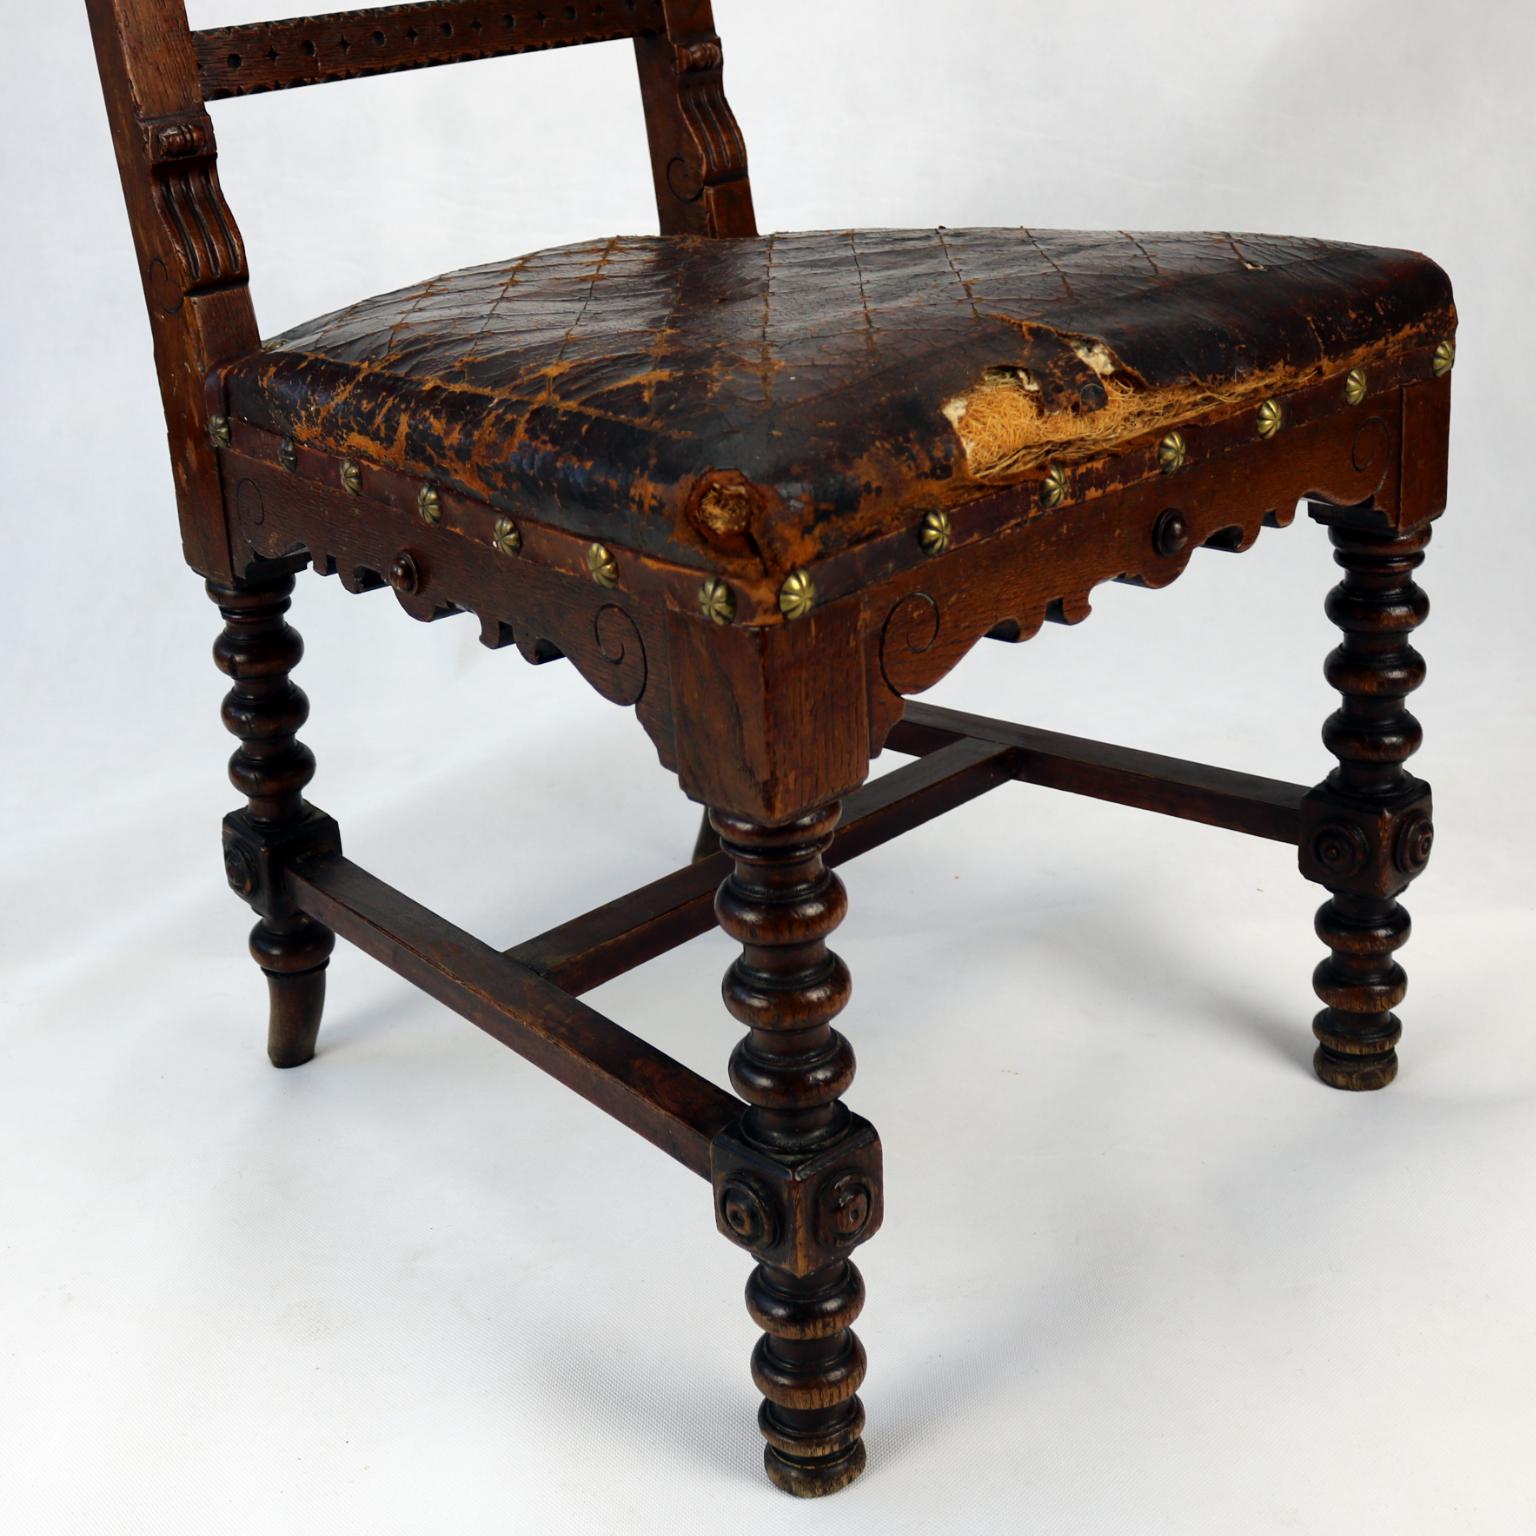 Reanaissance Revival Hand-Carved Chair with Embossed Leather 19th Century For Sale 4